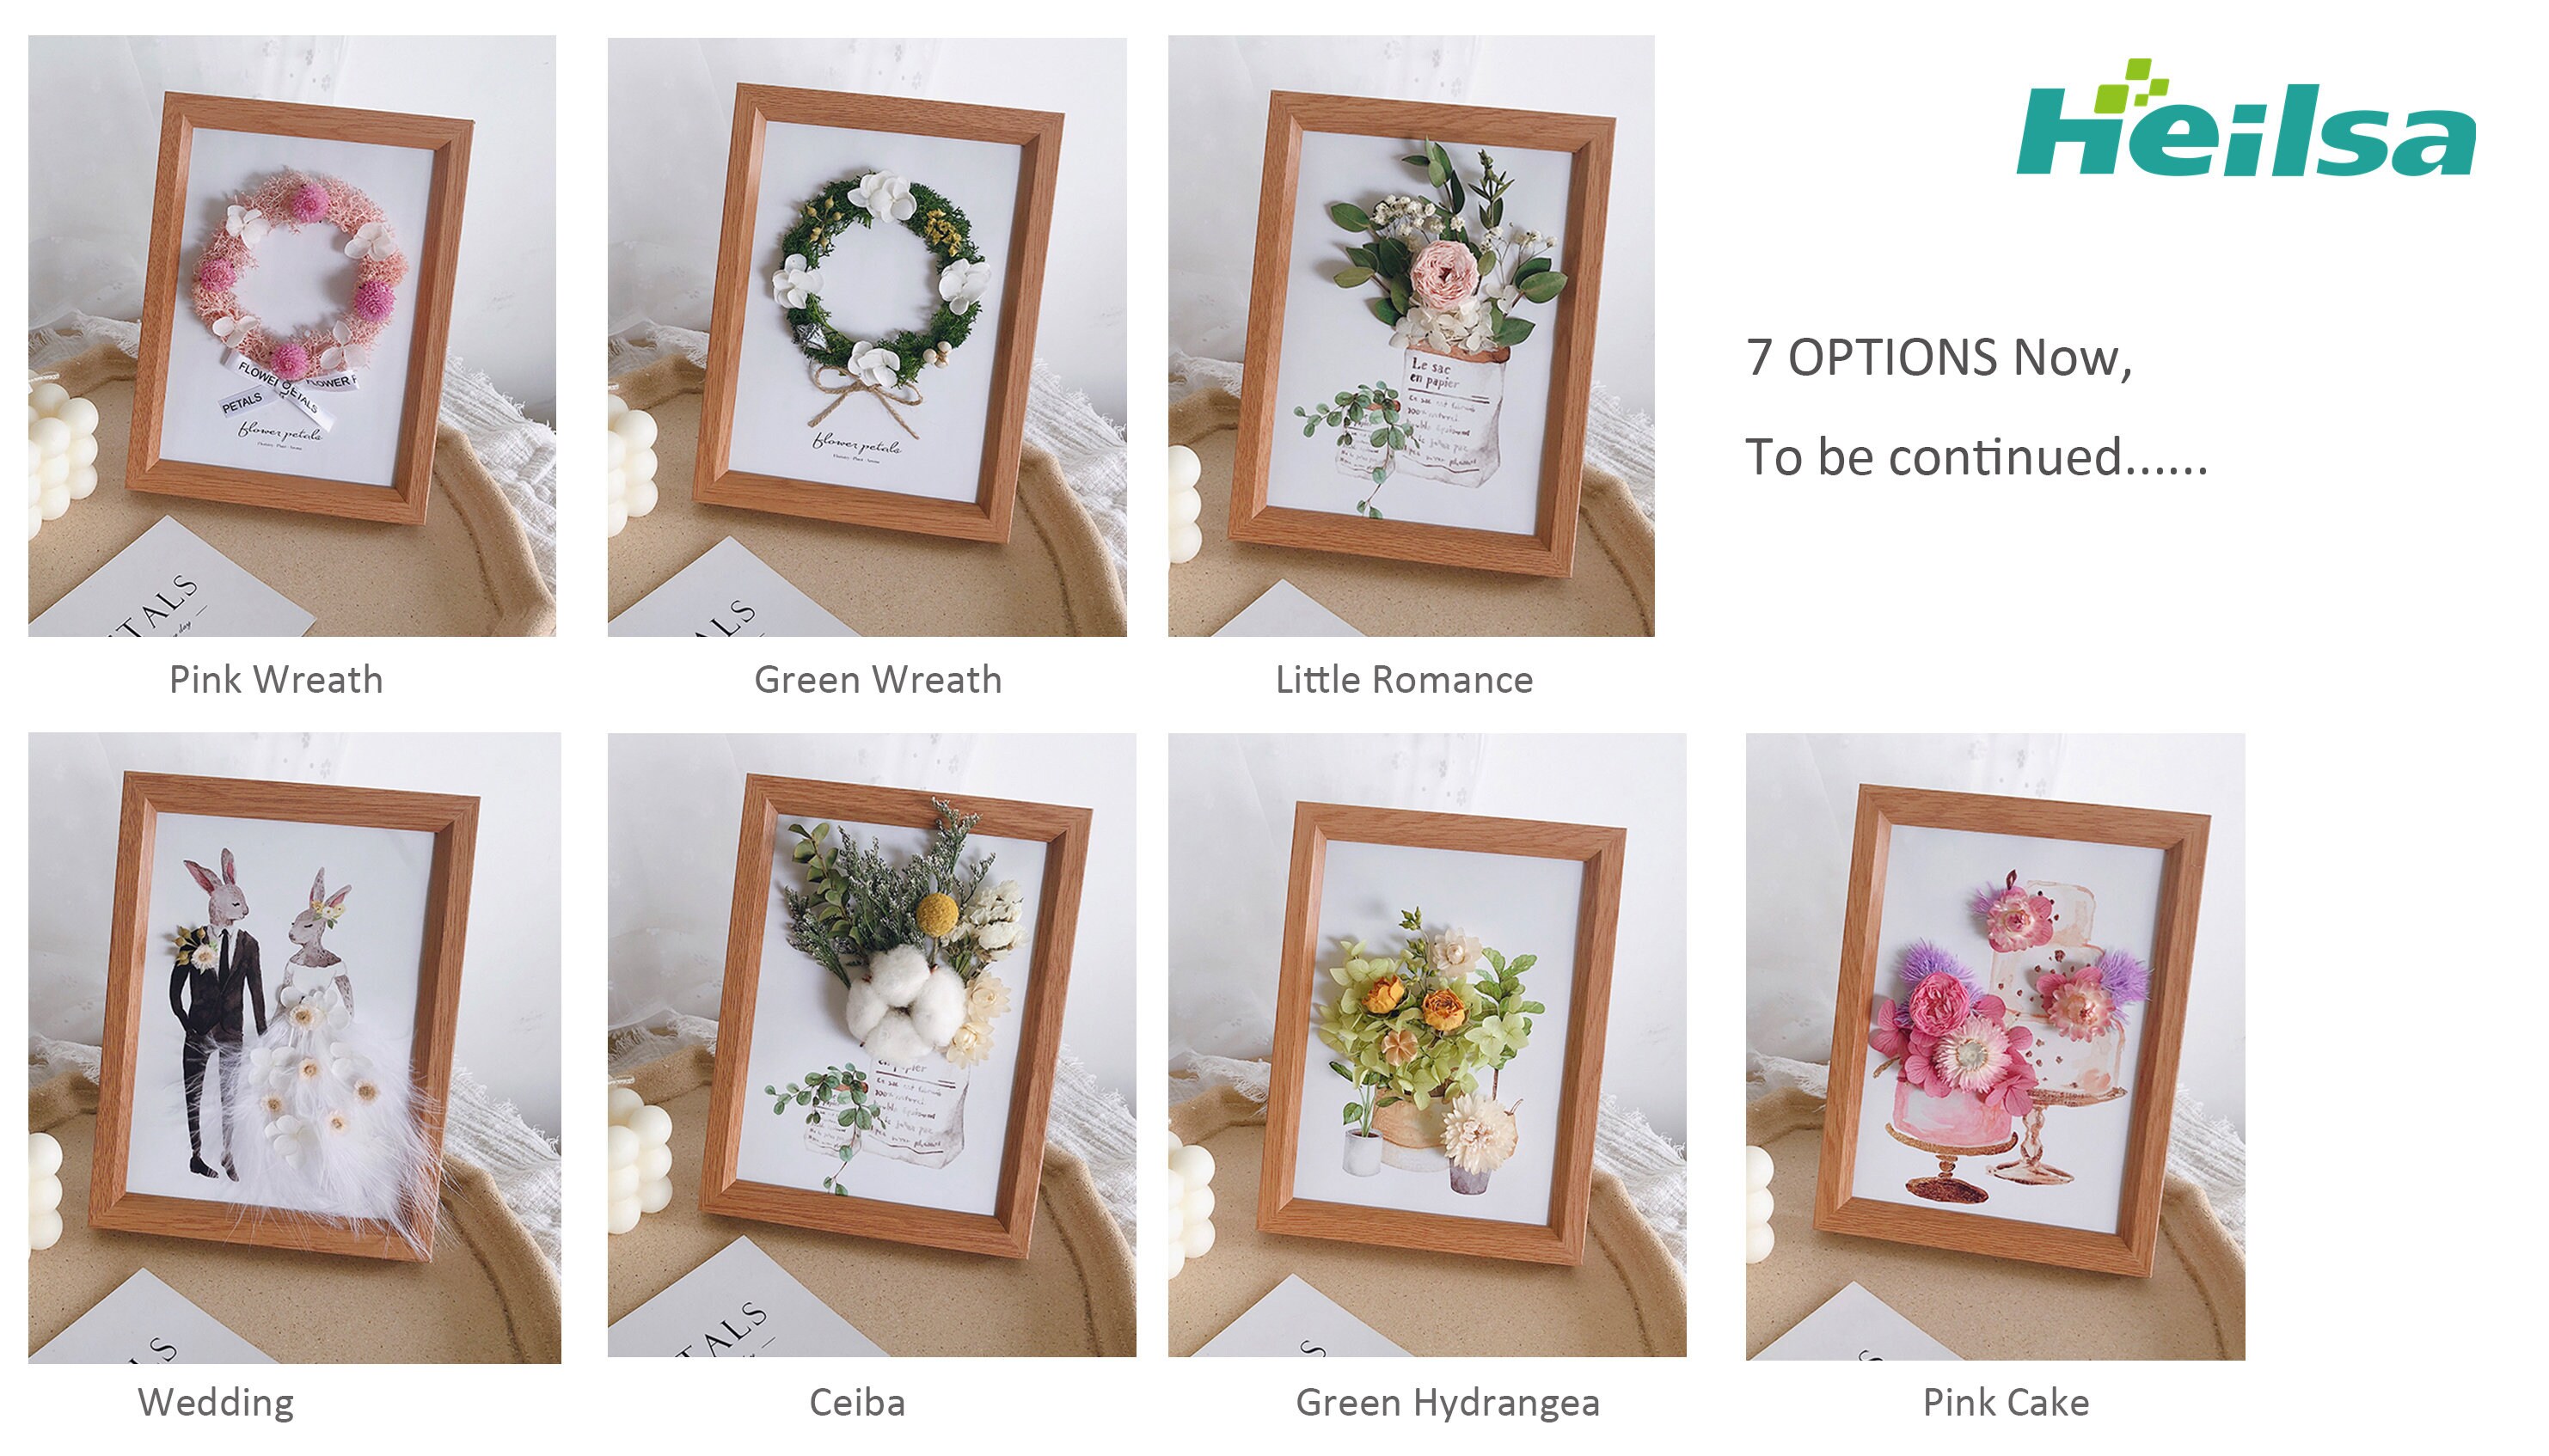 Lsfyszd Floral Wall Hanging, Dried Flowers Printed Artwork Floating Picture Frame with Chain for Home Decor, Size: 20cm*15cm/7.9*5.9